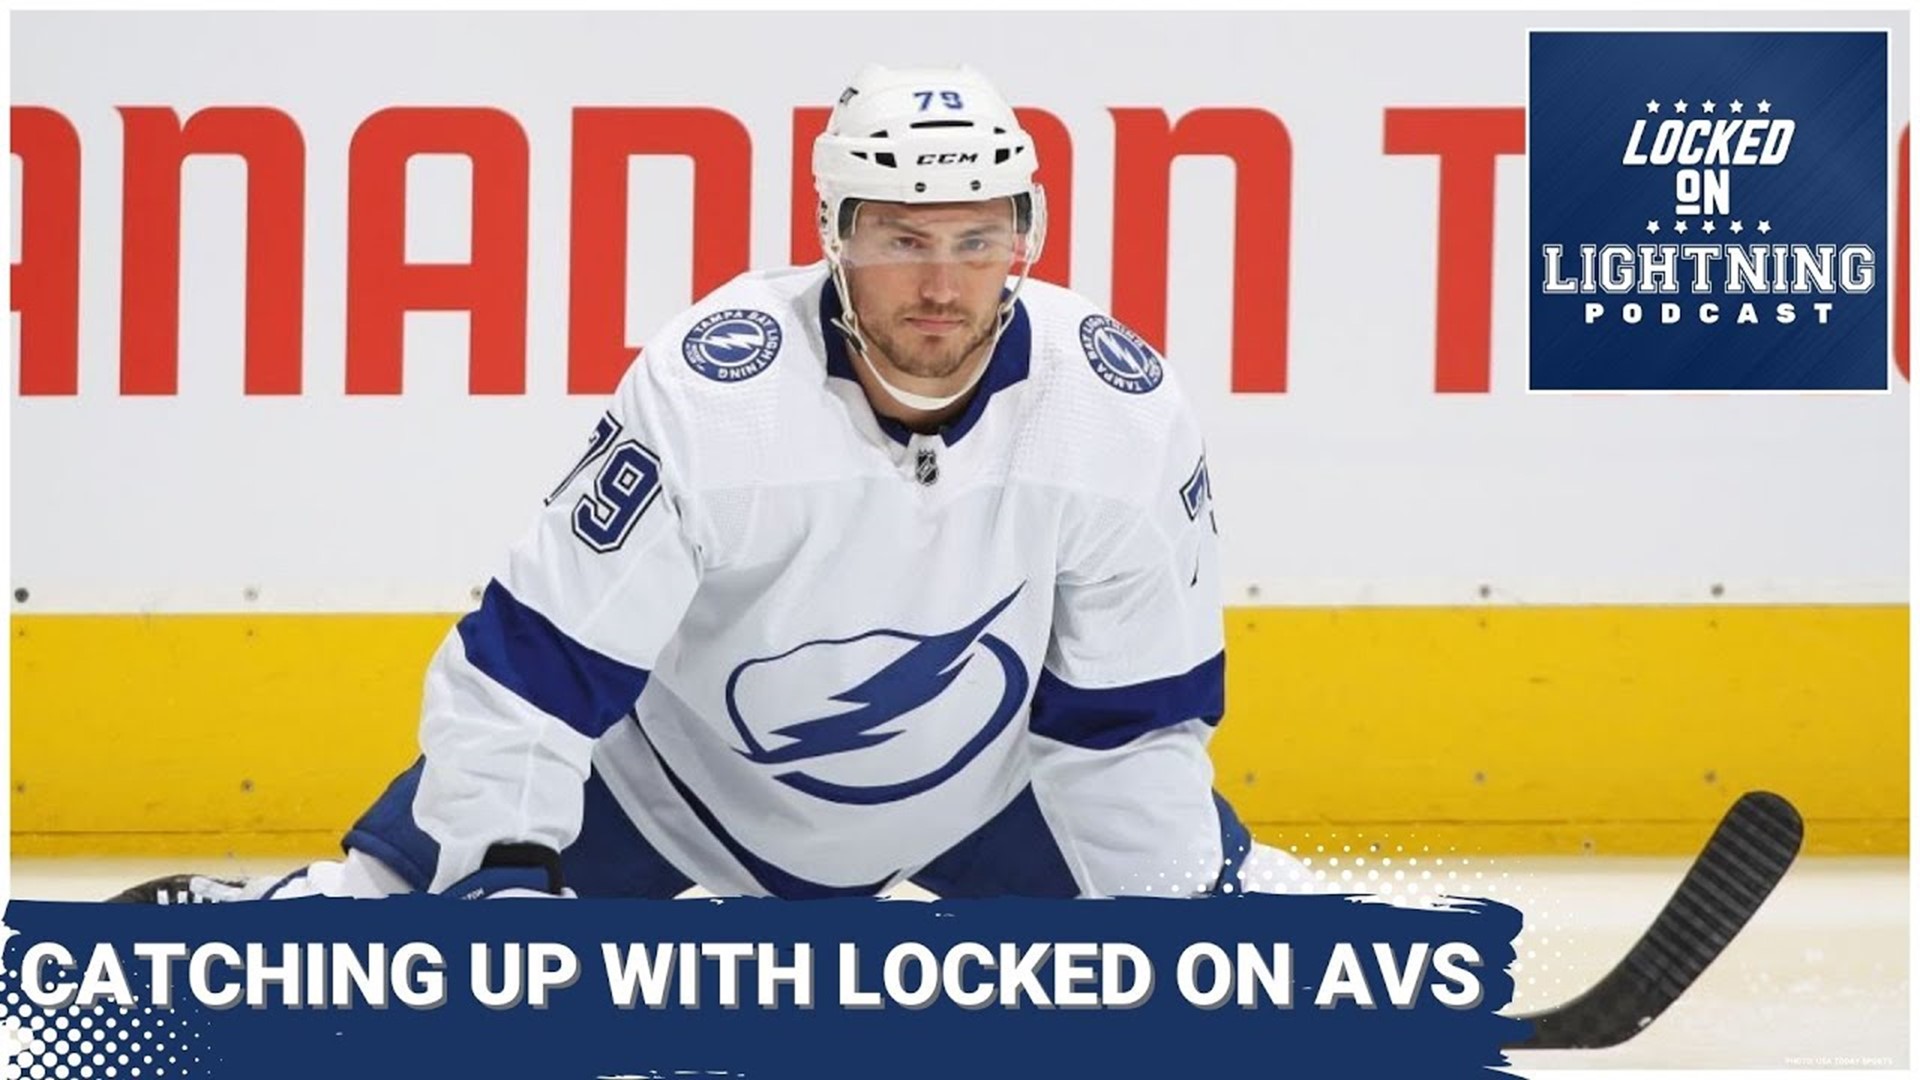 Has Ross Colton played his final game for the TB Lightning?